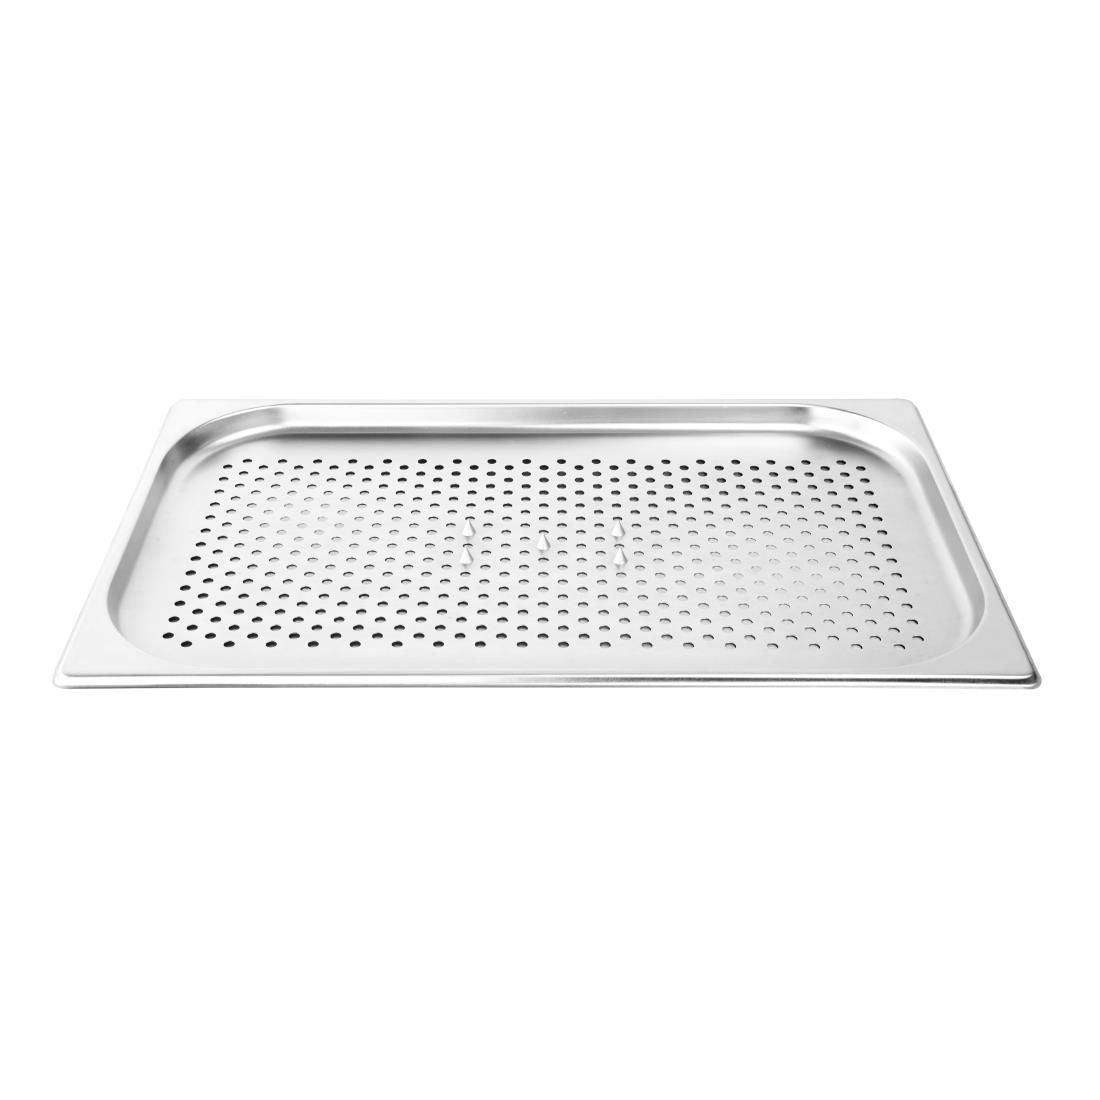 DN911 Vogue Stainless Steel Perforated Spiked Meat Dish JD Catering Equipment Solutions Ltd